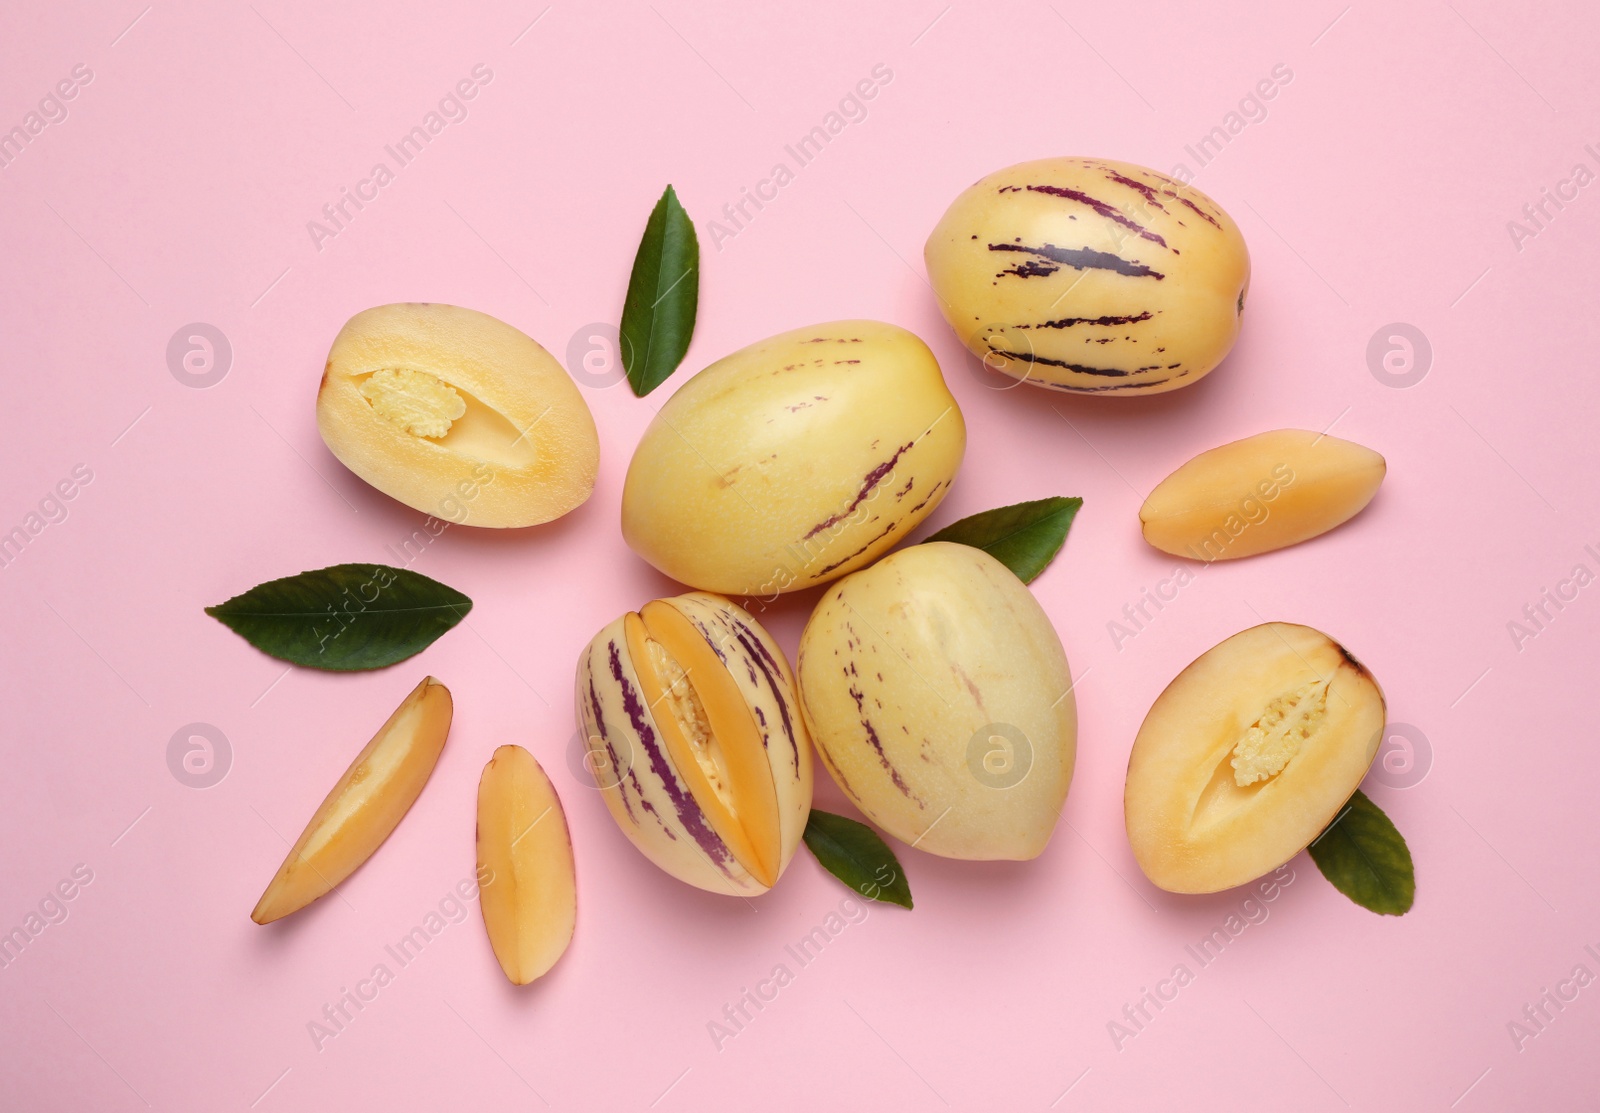 Photo of Whole and cut pepino melons with green leaves on pink background, flat lay